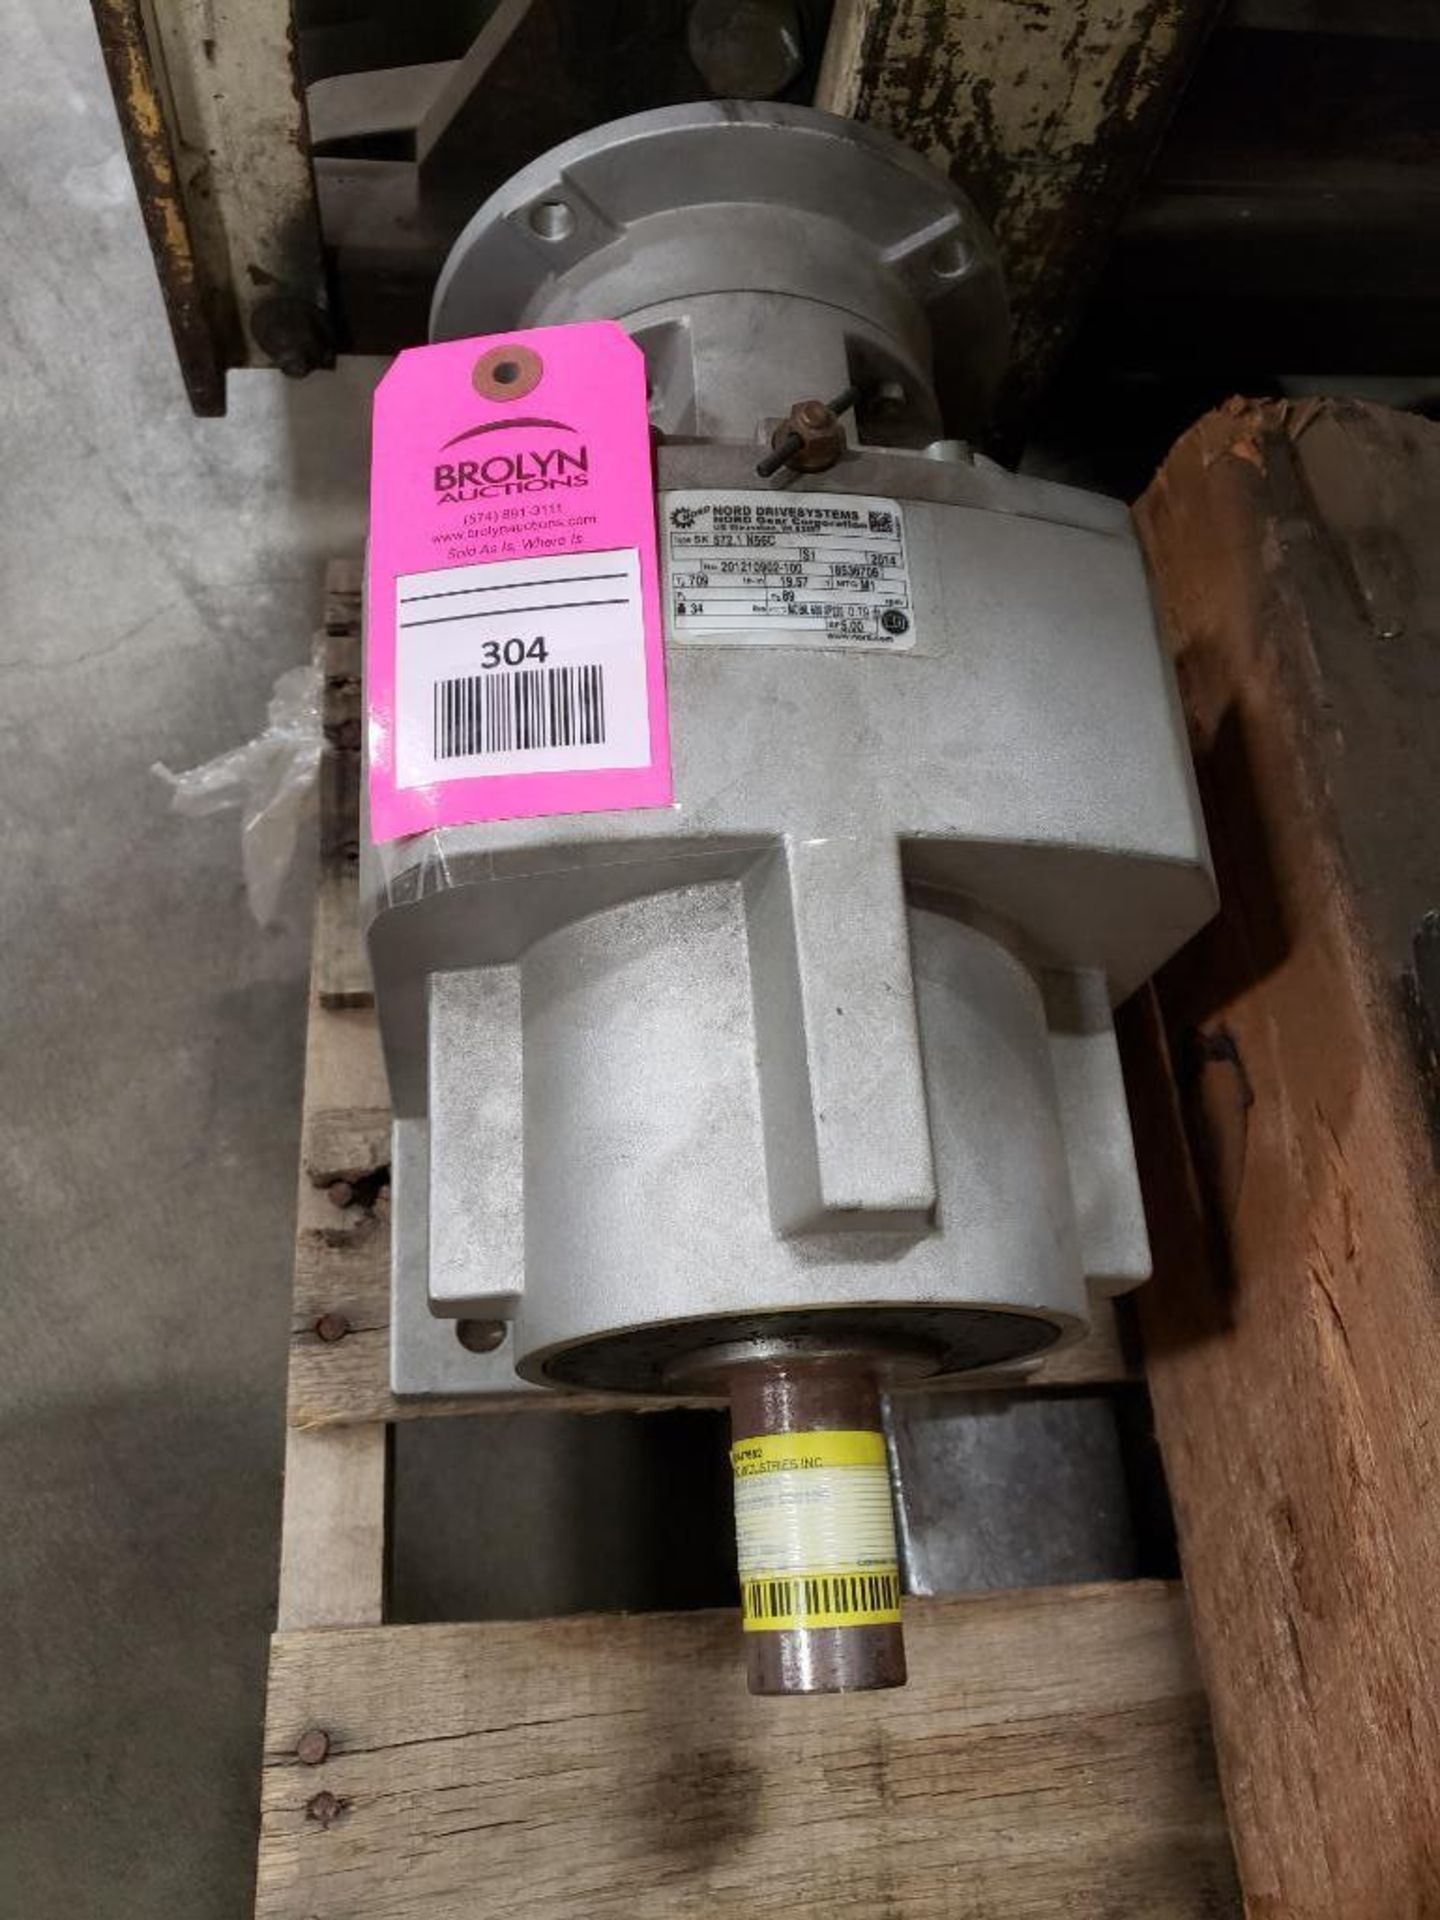 Nord Drive systems gear box model 572.1-N56C, ratio 19.57:1. New as pictured.